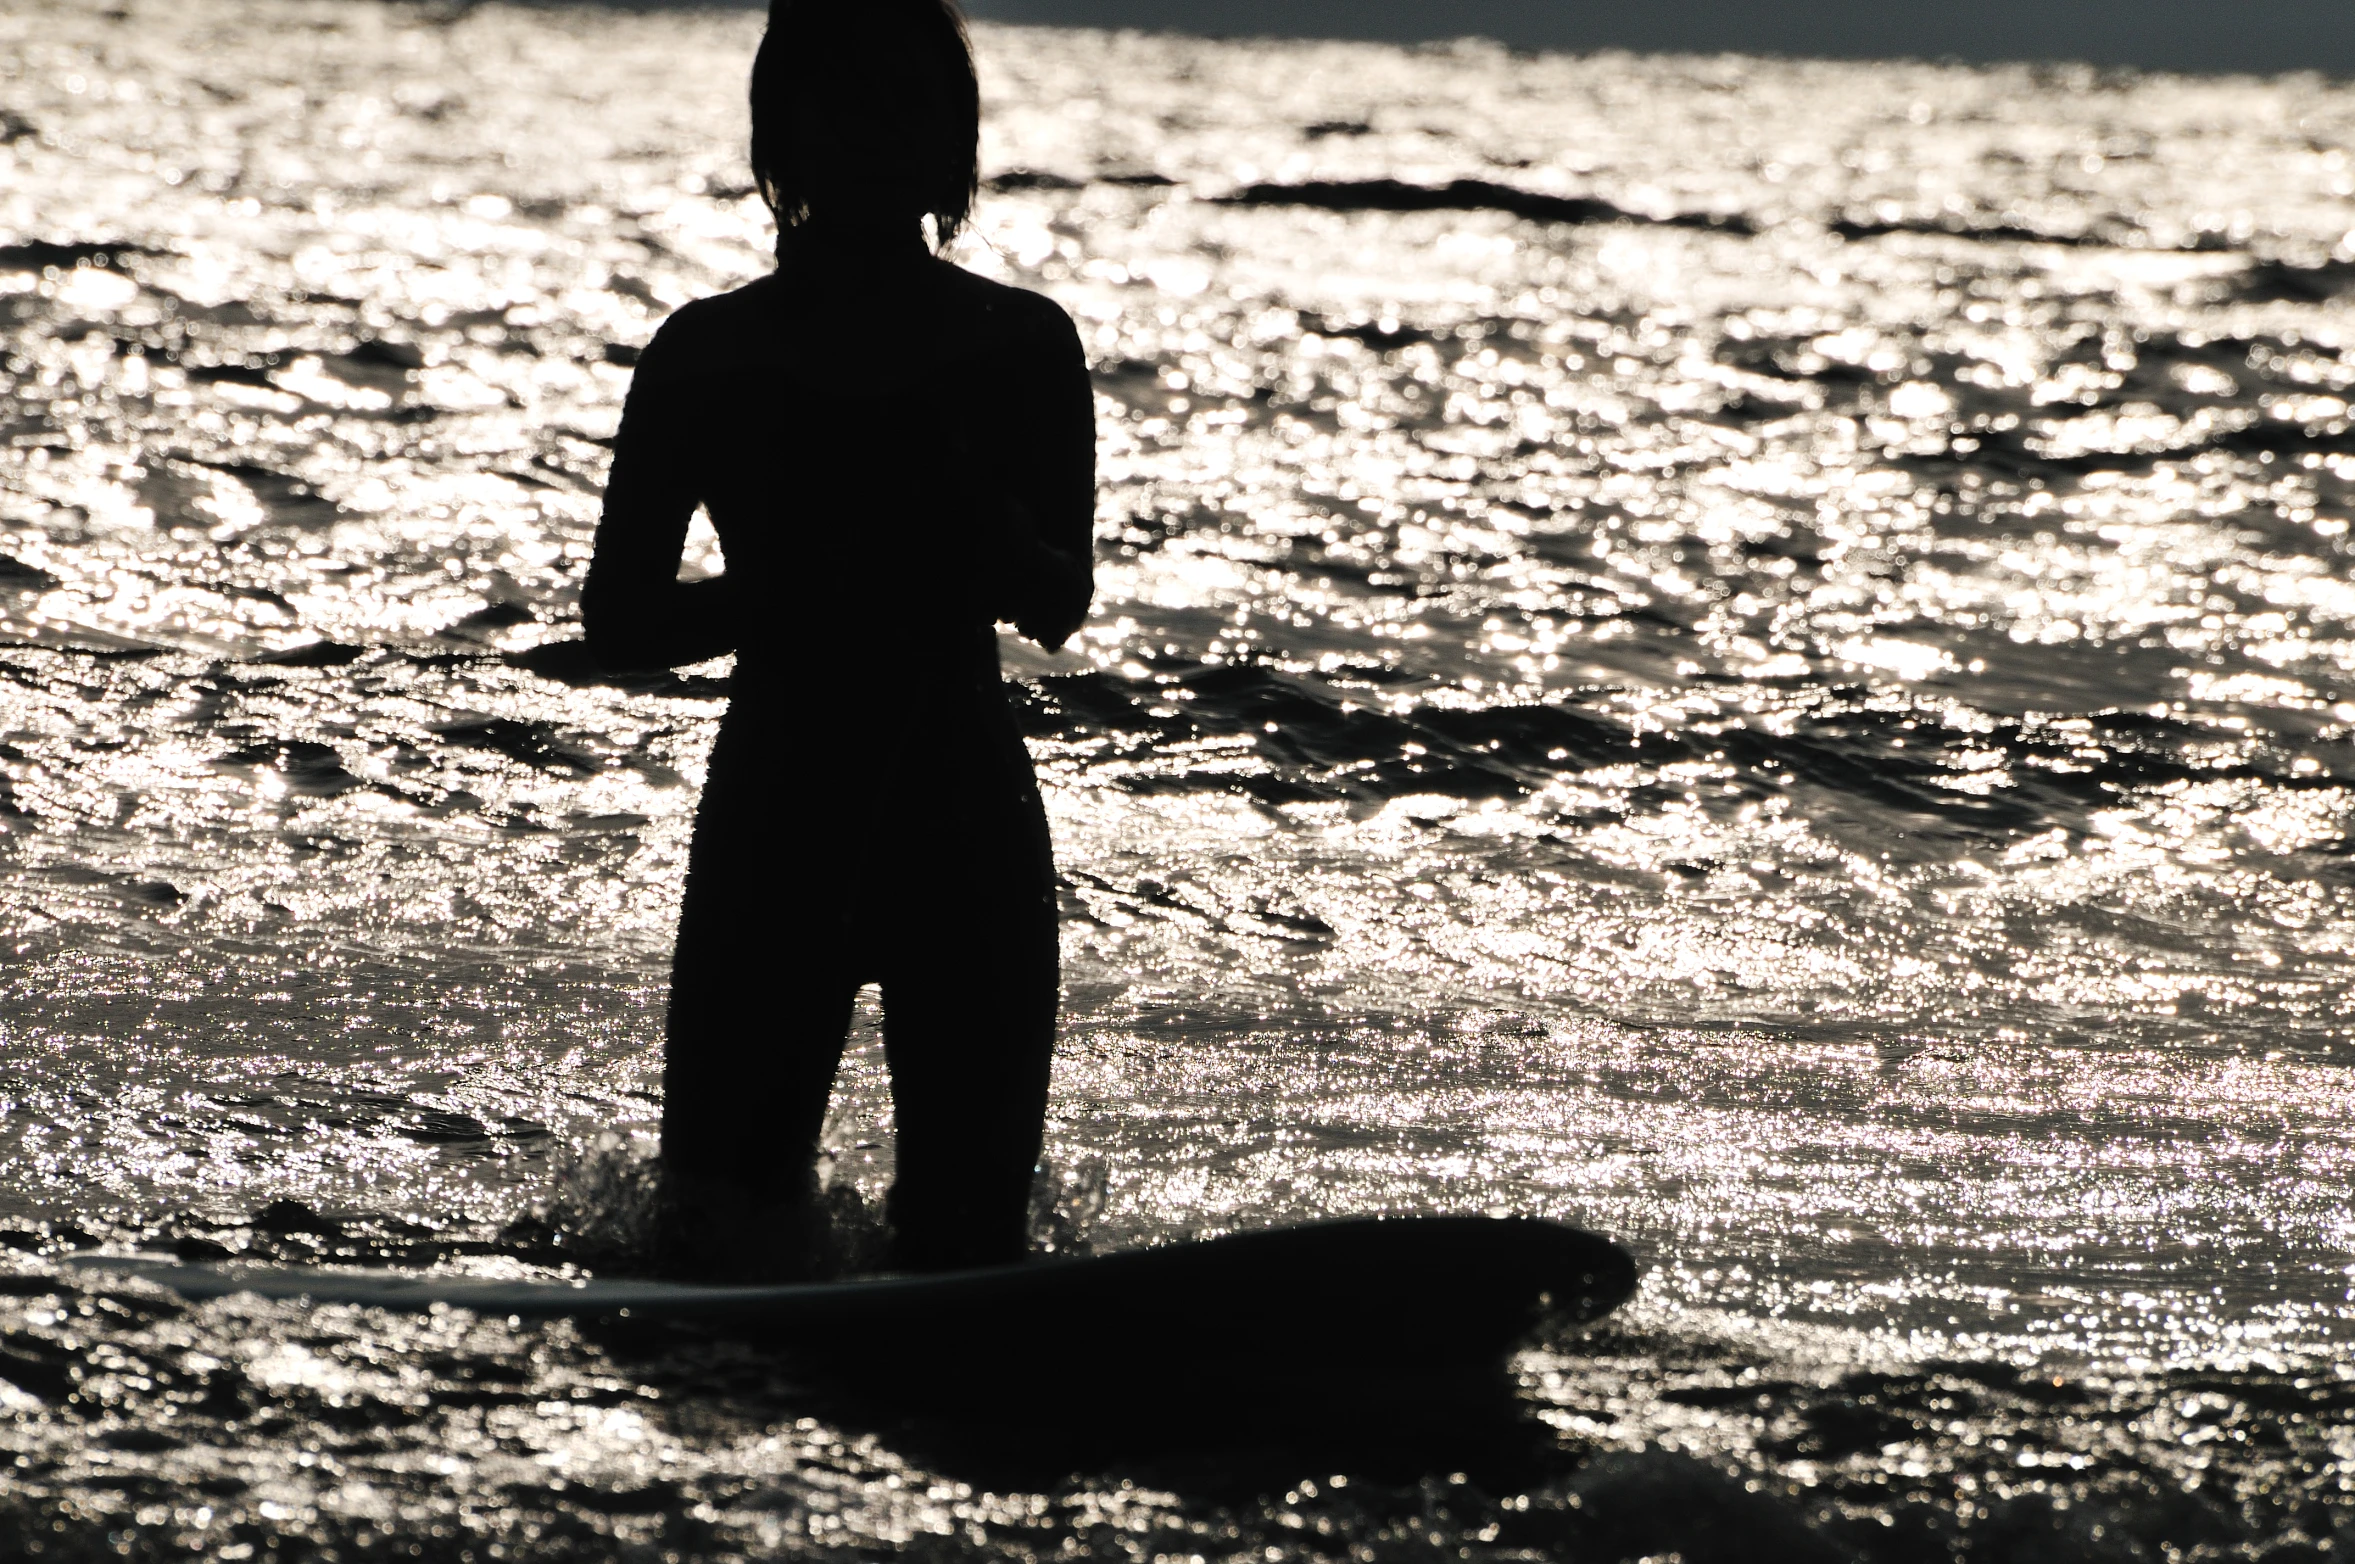 a person in a wetsuit stands in the water with a surf board